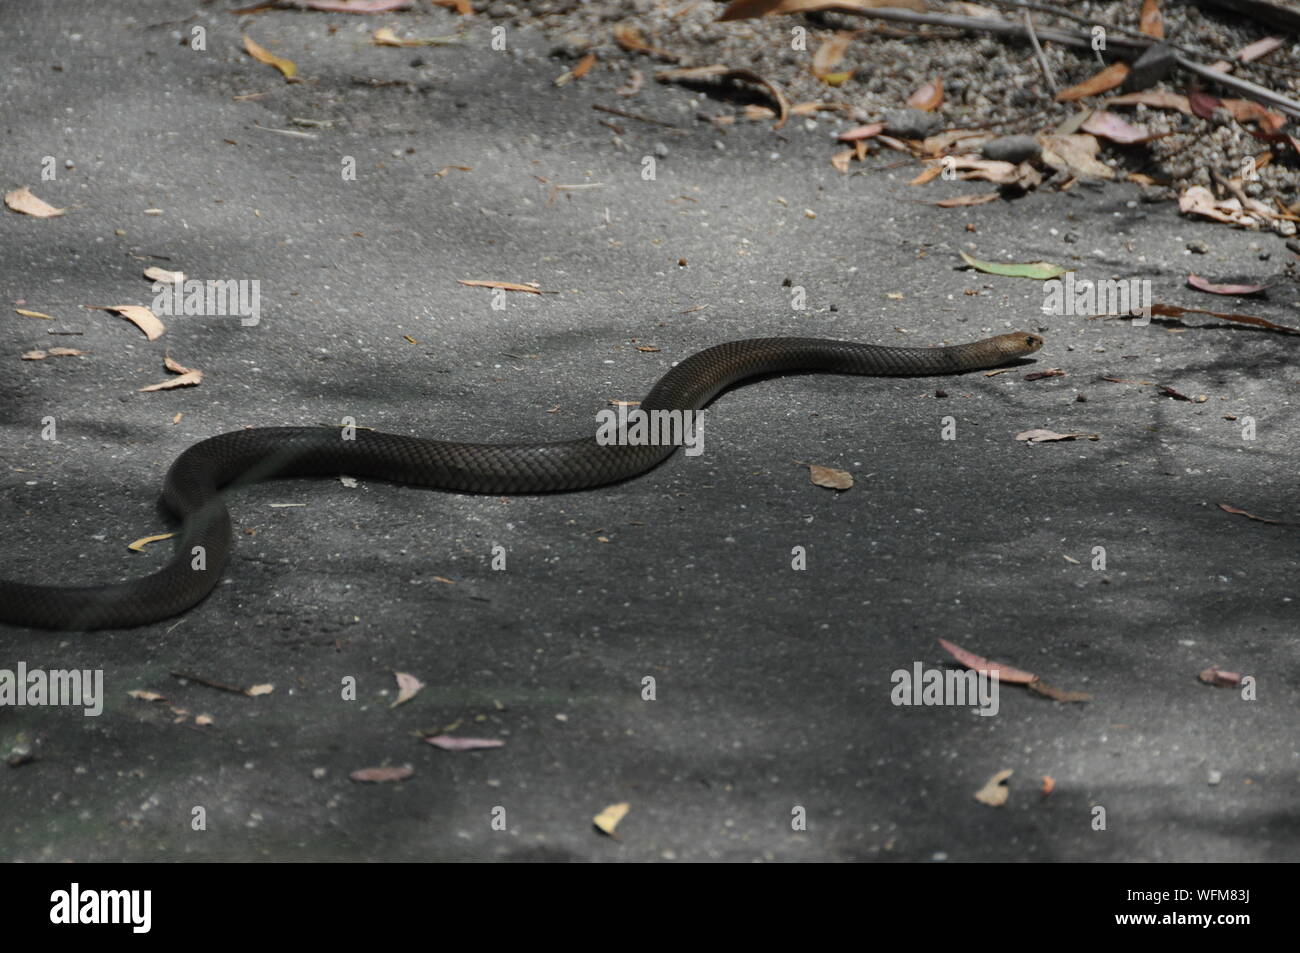 High Angle View Of Venomous Snake On Road Stock Photo